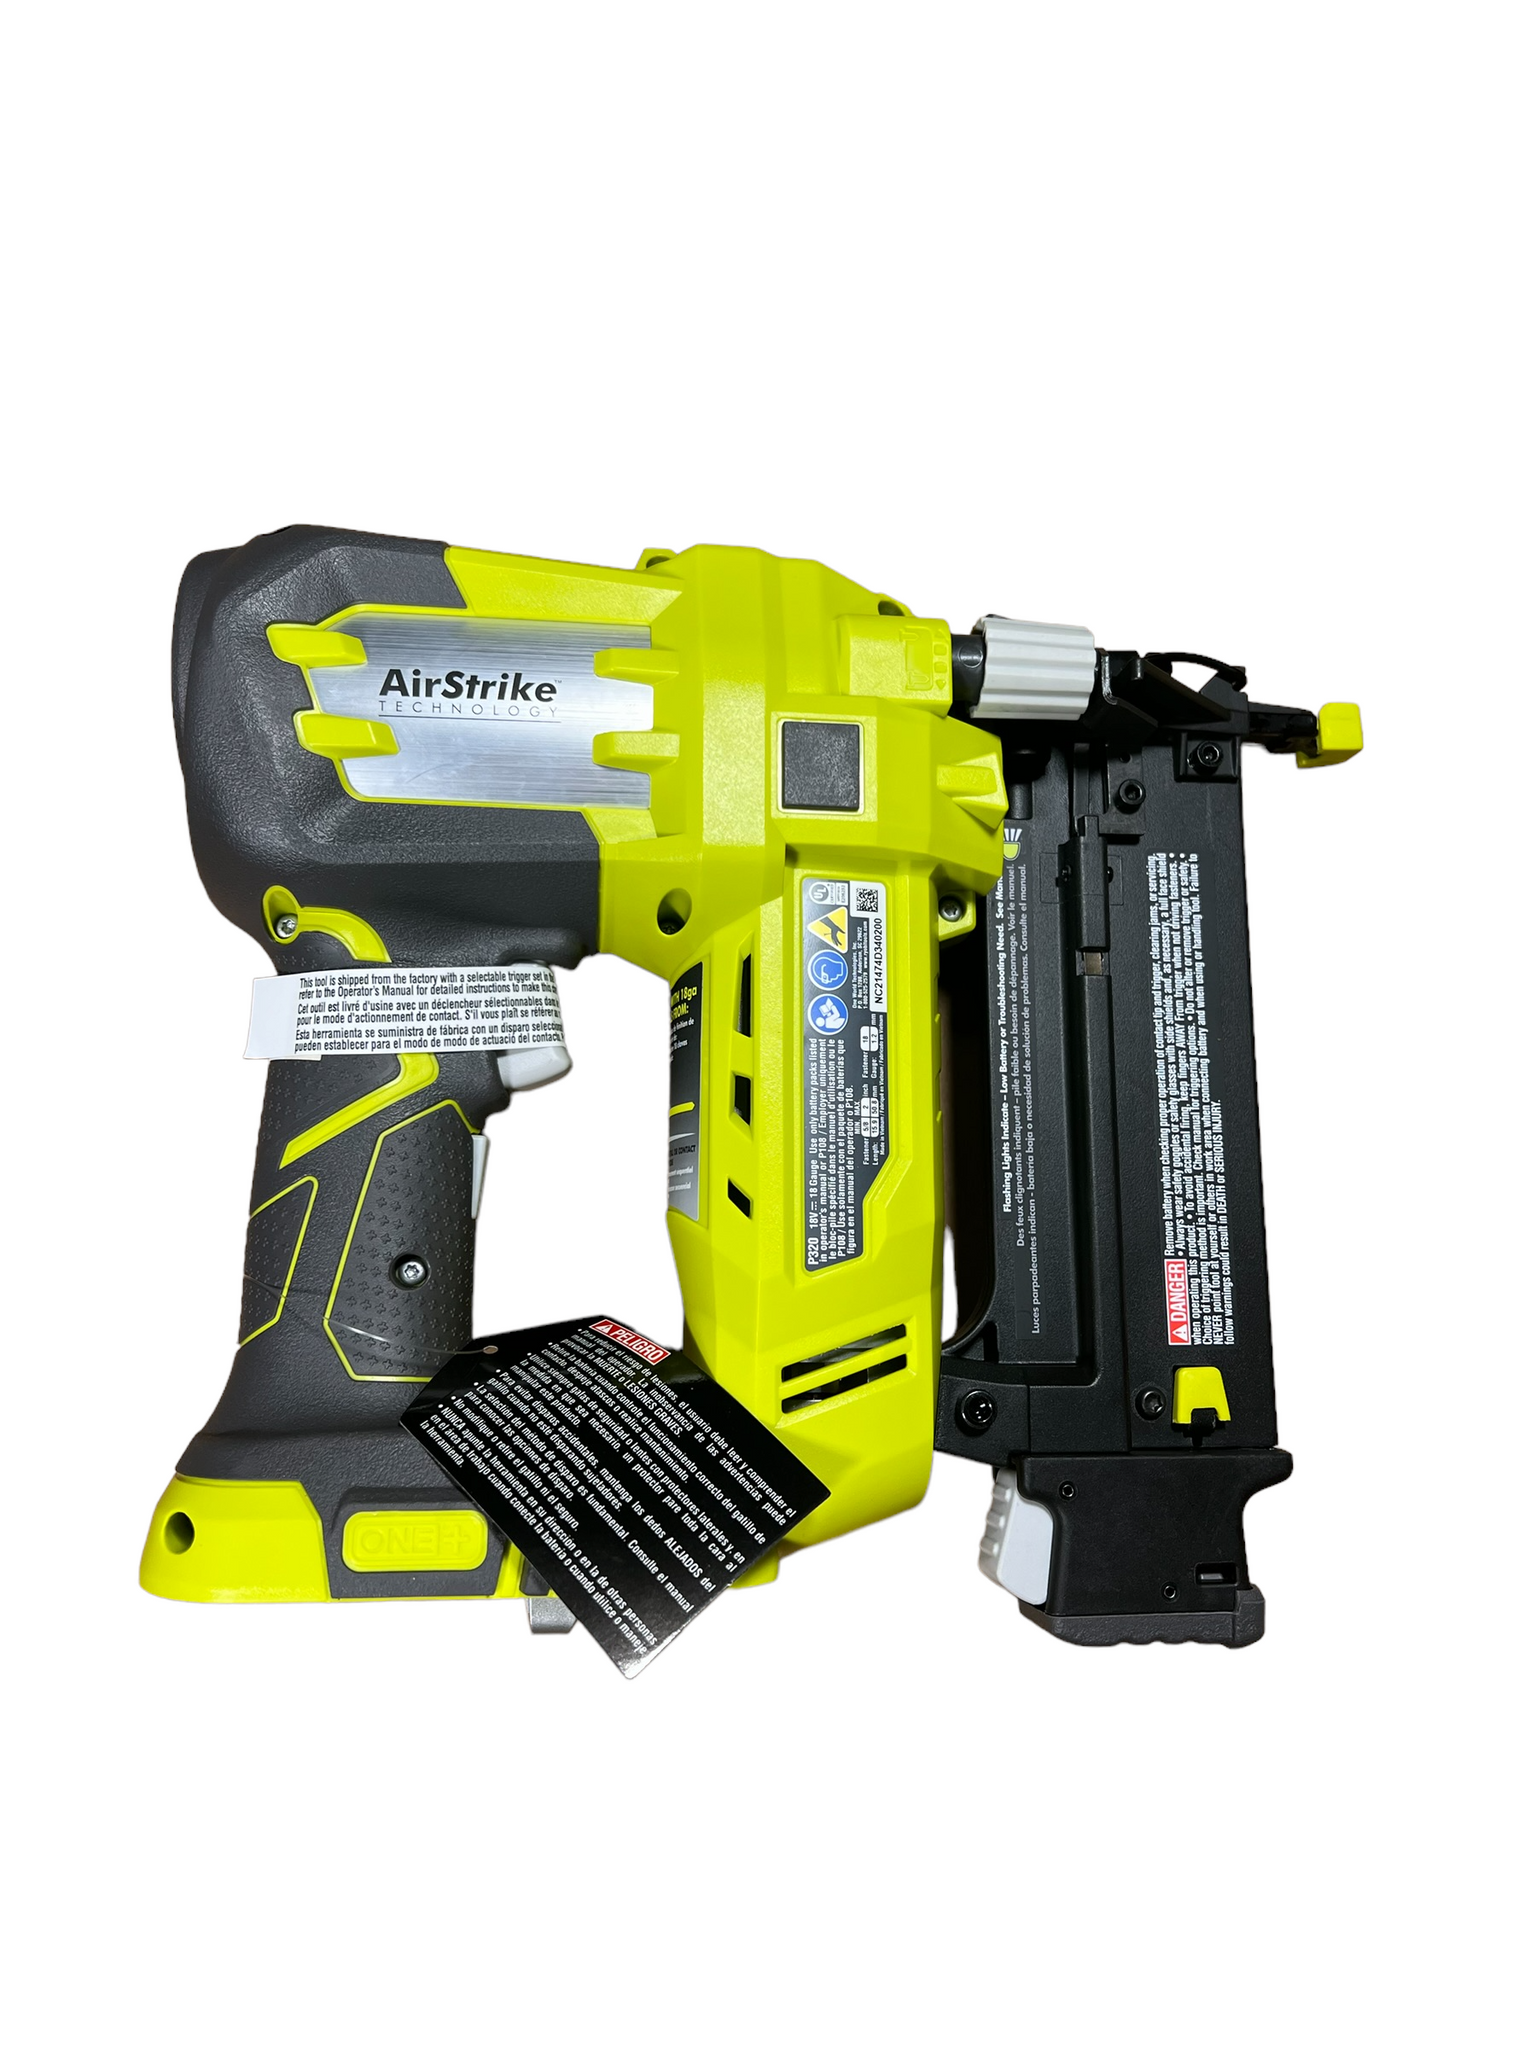 18-Volt One+ Airstrike 18-Gauge Cordless Brad Nailer (Tool-Only) Yes